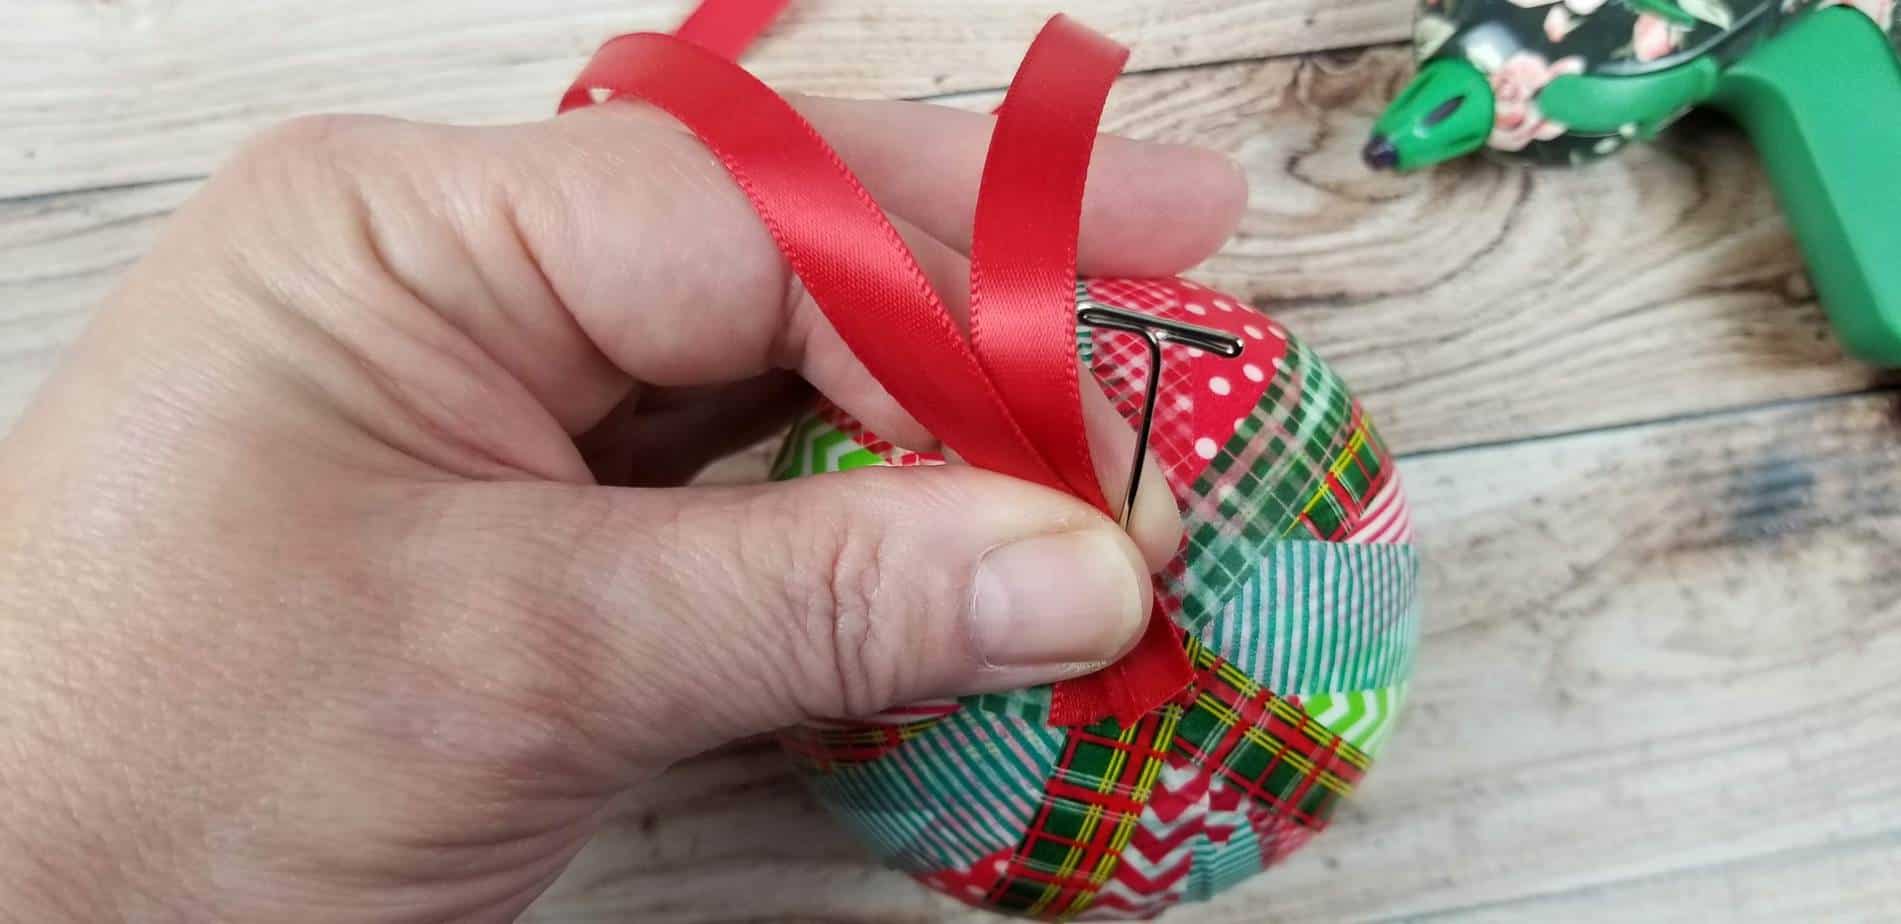 a hand holding a T pin and red ribbon at the top of the ornament wrapped in washi tape on a wooden table with a hot glue gun in the background